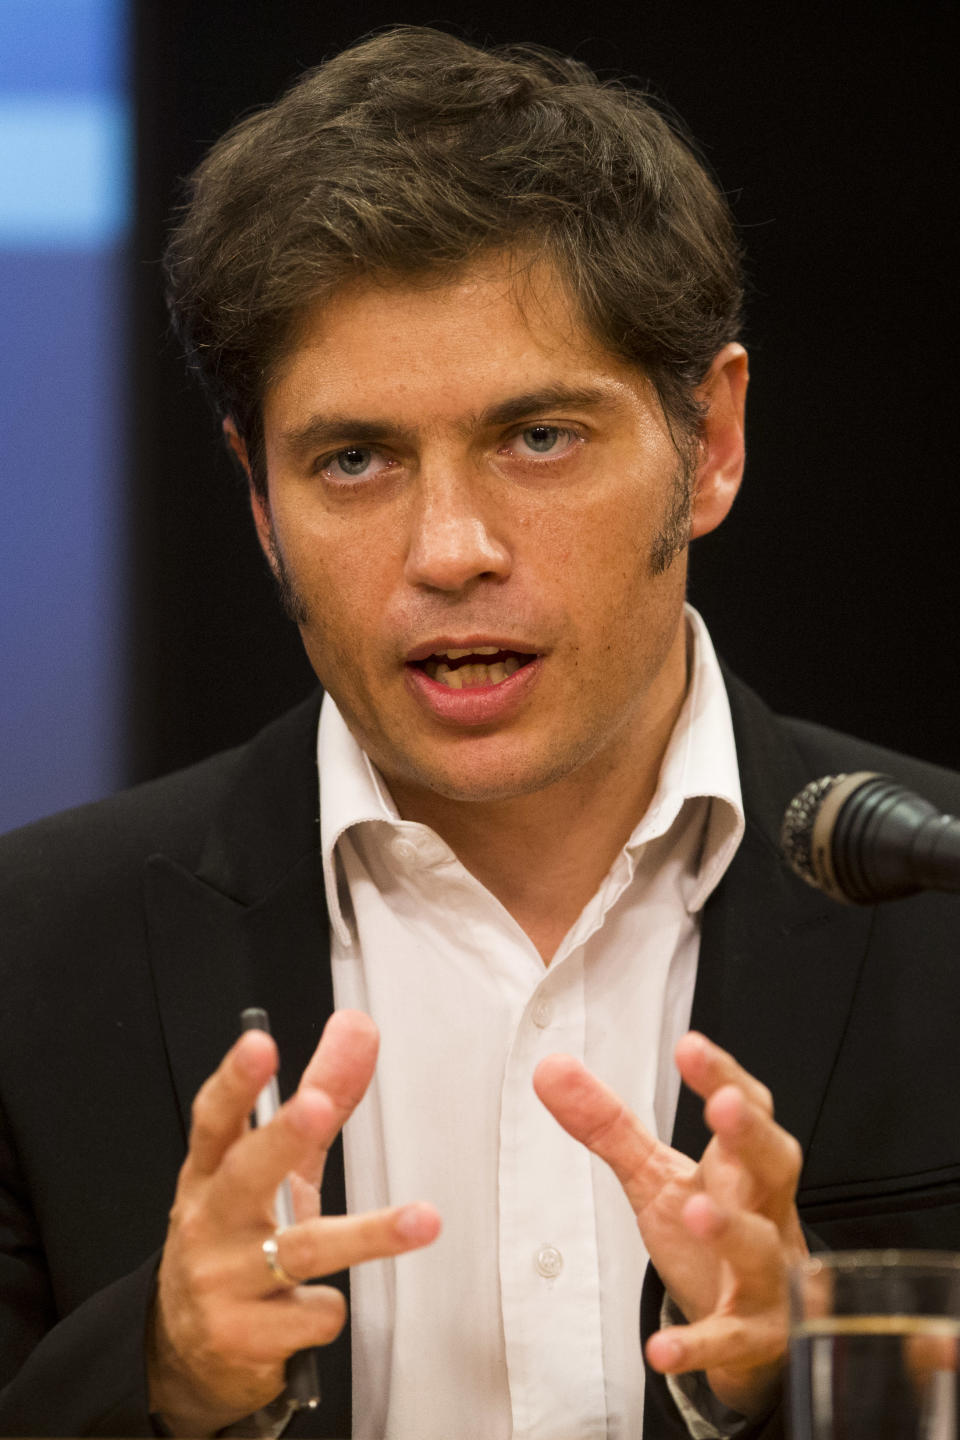 Argentine Economy Minister Axel Kicillof speaks during a news conference in Buenos Aires, Argentina, Wednesday, Jan. 29, 2014. Kicillof announced a deal with Argentina's largest retailers to the lower prices of consumer and household electronics that were raised during the recent currency devaluation. With Argentina’s peso on its sharpest slide in 12 years, Argentines are dealing with one of the world's highest inflation rates. (AP Photo/Victor R. Caivano)